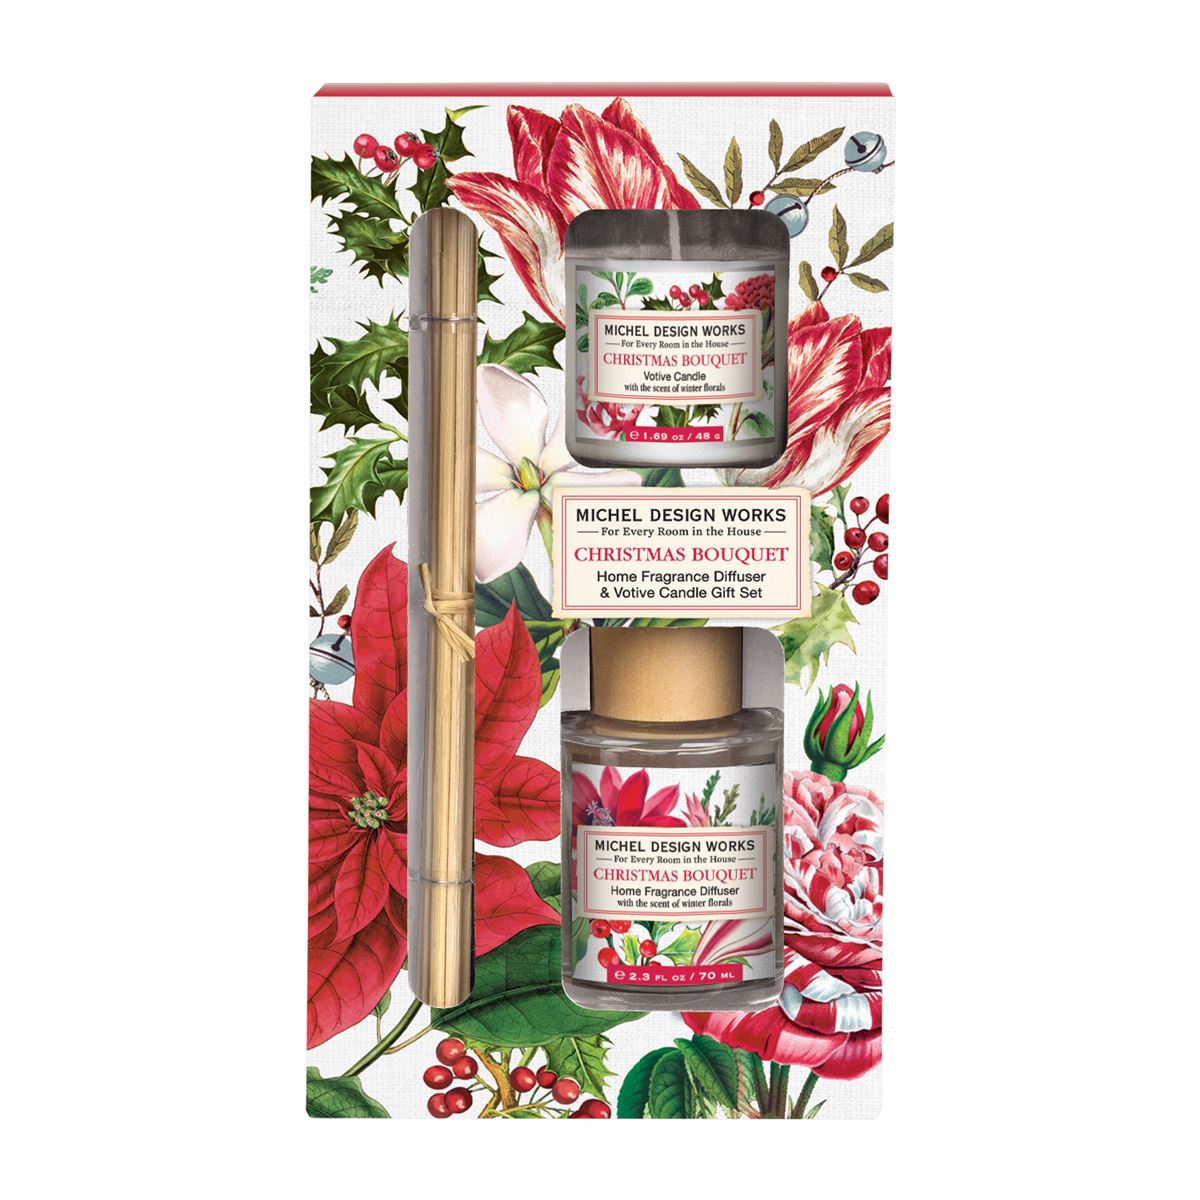 Christmas Bouquet Home Fragrance Diffuser &amp; Votive Candle Gift Set - Zinnias Gift Boutique